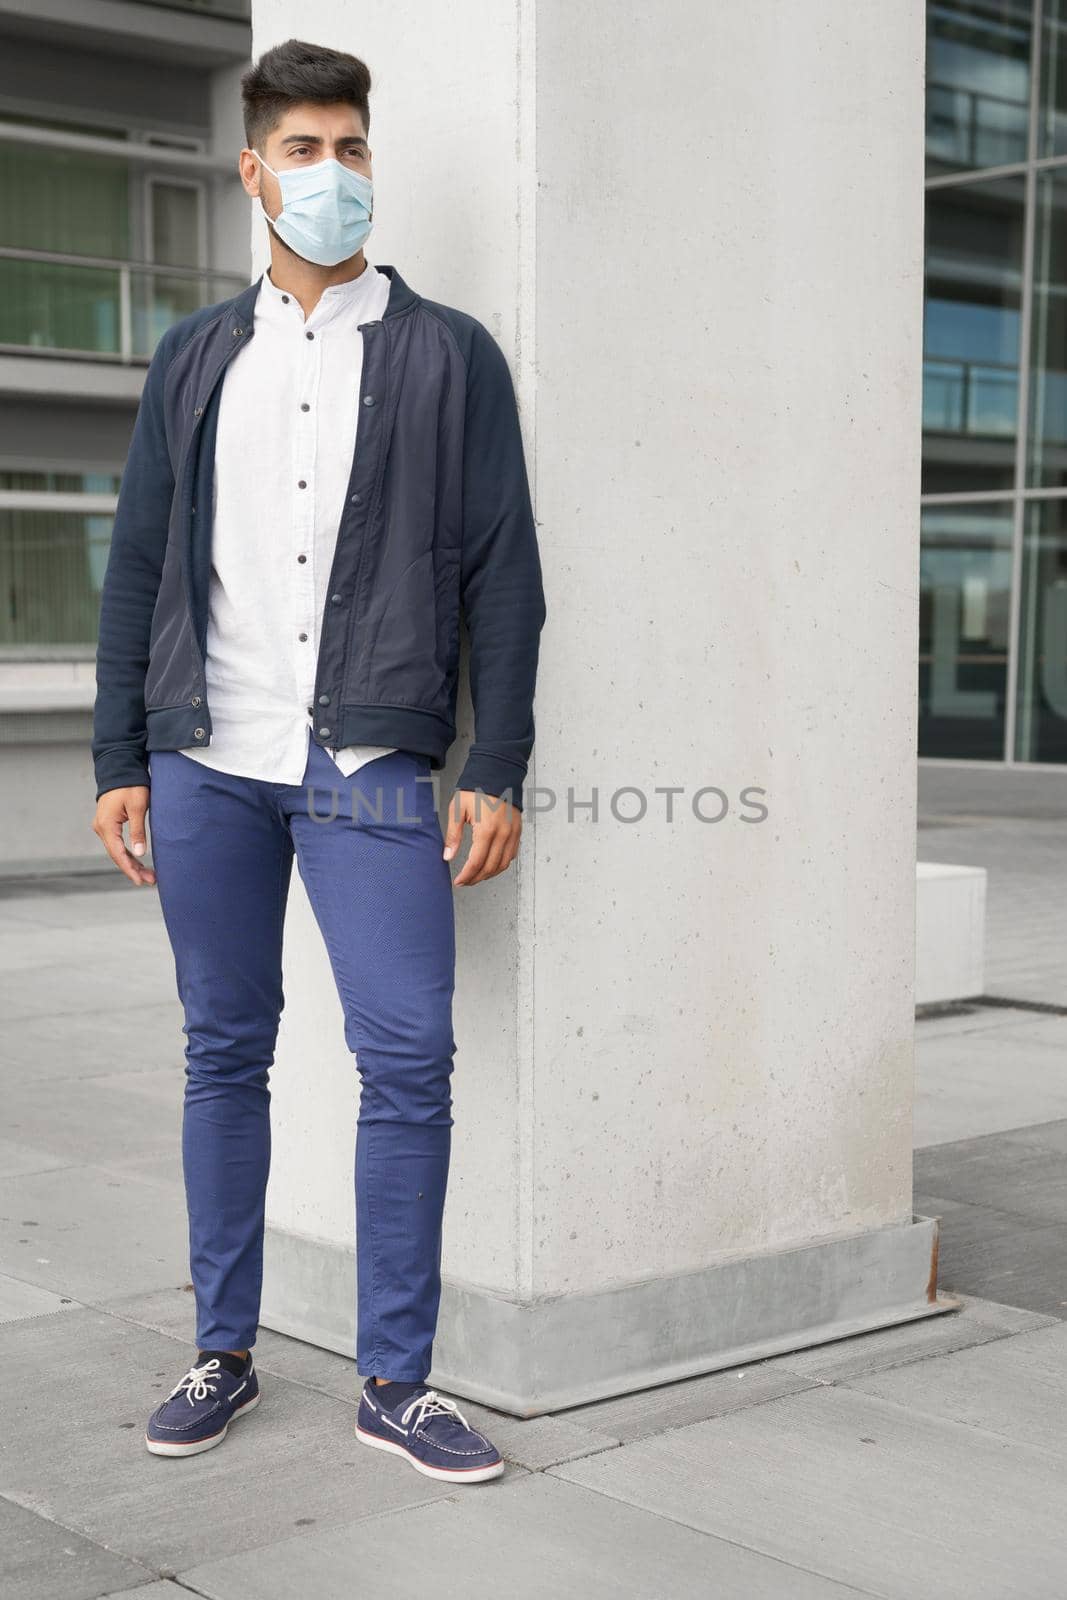 Handsome young man standing outdoors in medical mask. Coronavirus concept. High quality photo